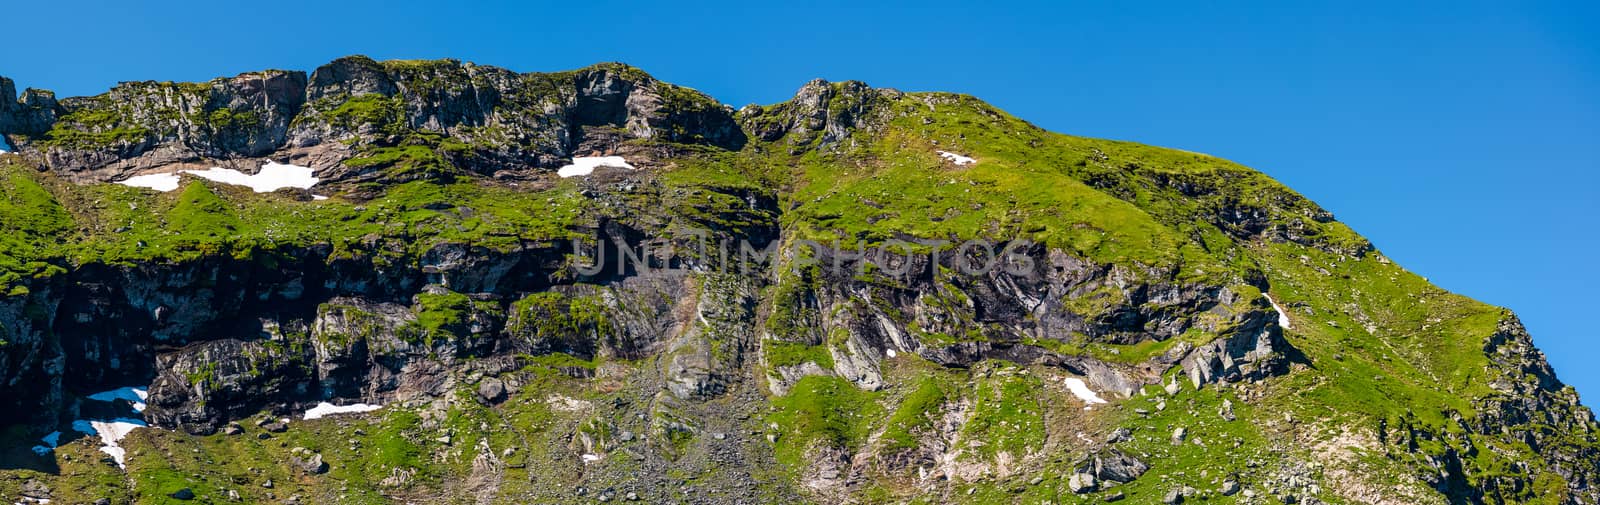 mountain ridge with rocky cliffs and grassy slopes. beautiful nature scenery of Fagaras mountains, Romania